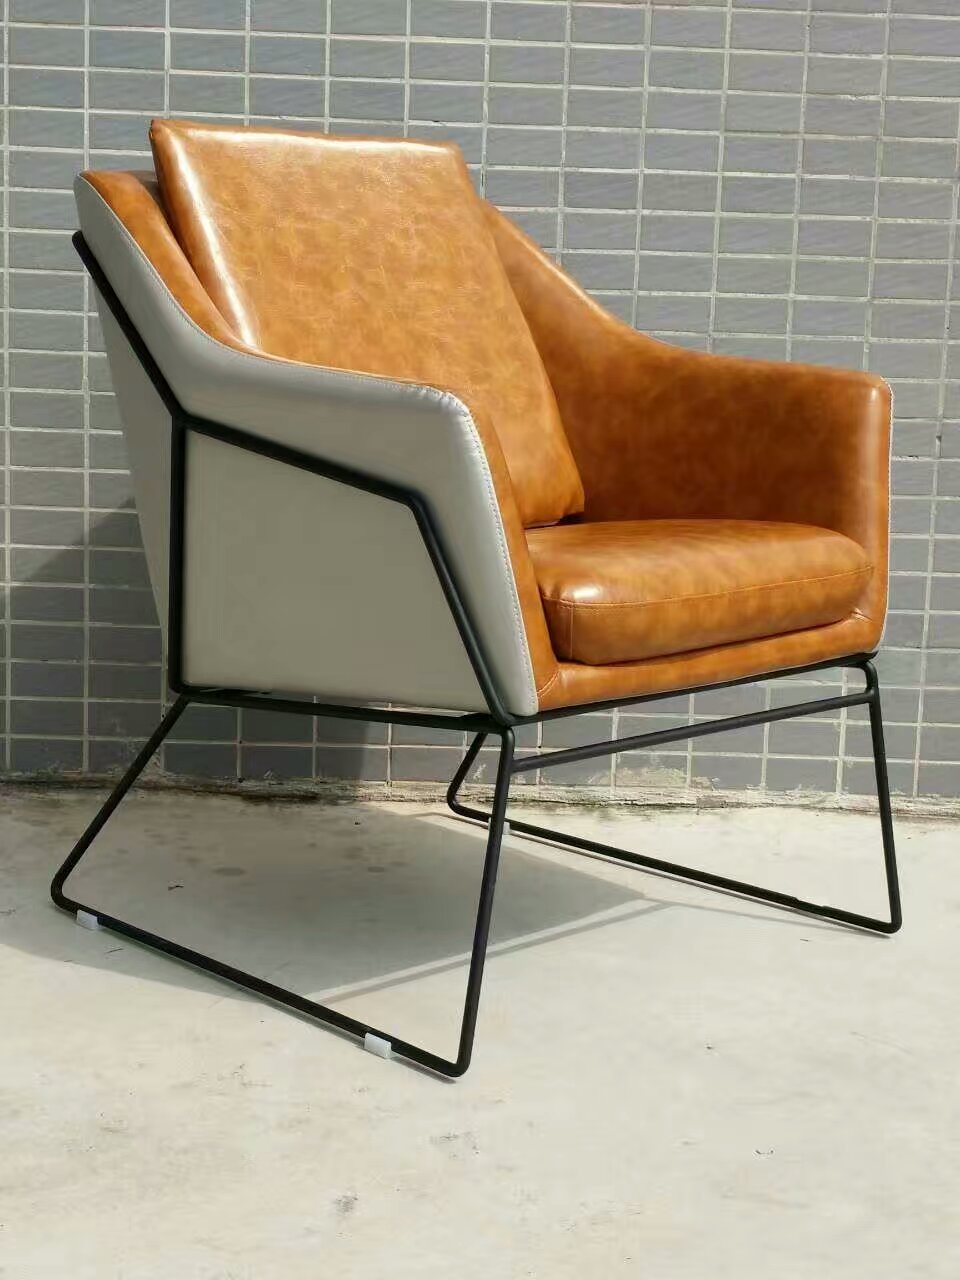 Unique Modern Furniture Chair, Living Room Leather Chair (XT07)